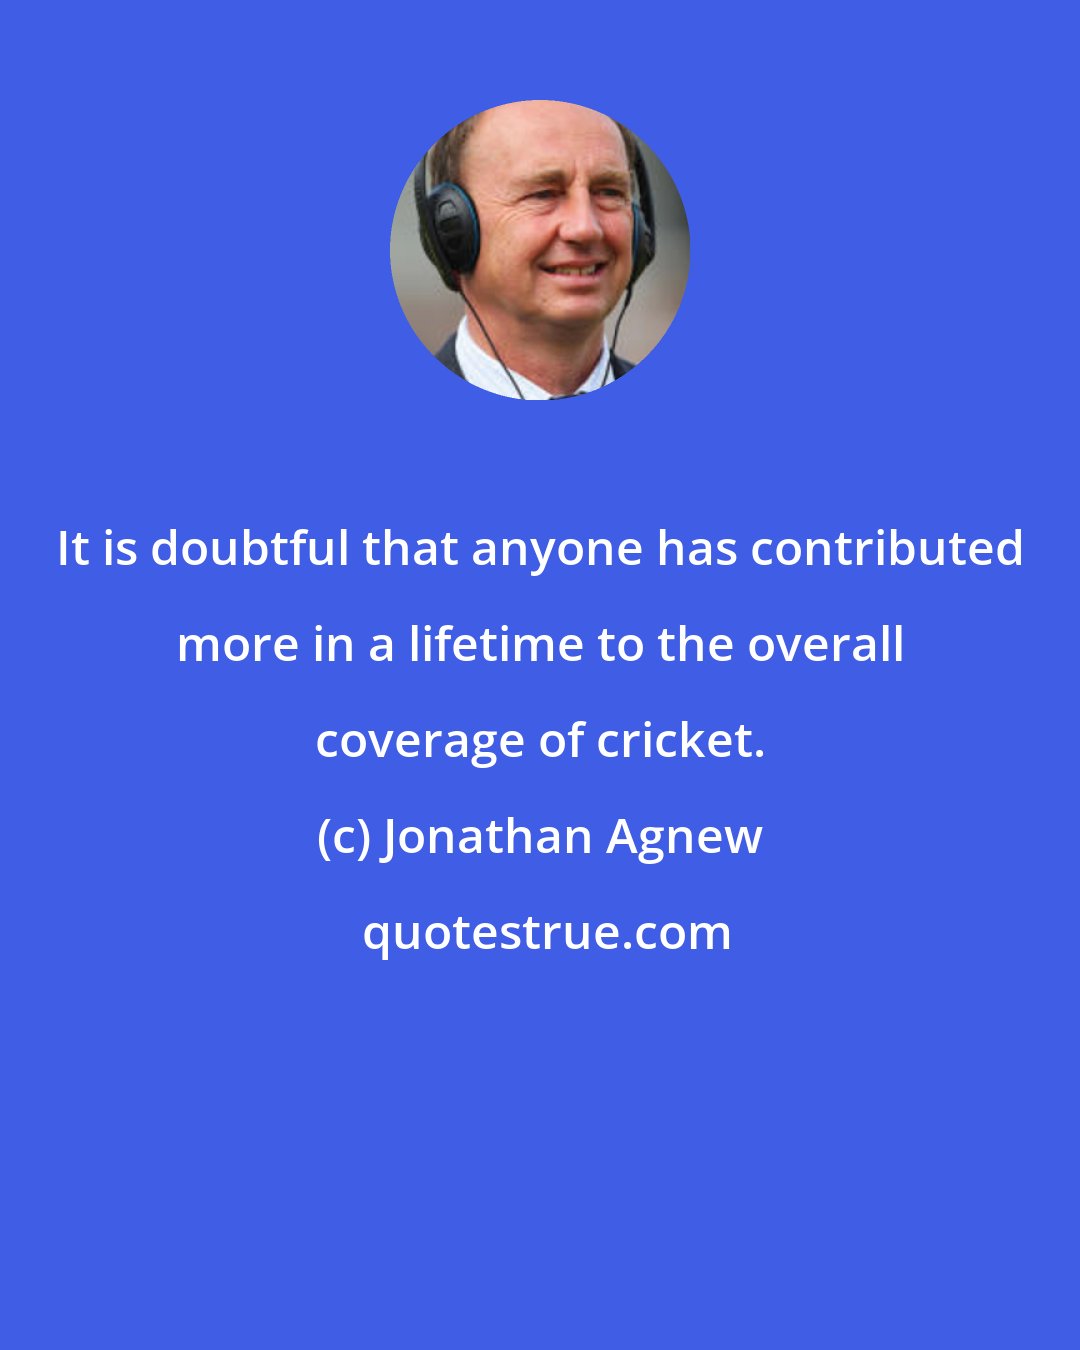 Jonathan Agnew: It is doubtful that anyone has contributed more in a lifetime to the overall coverage of cricket.